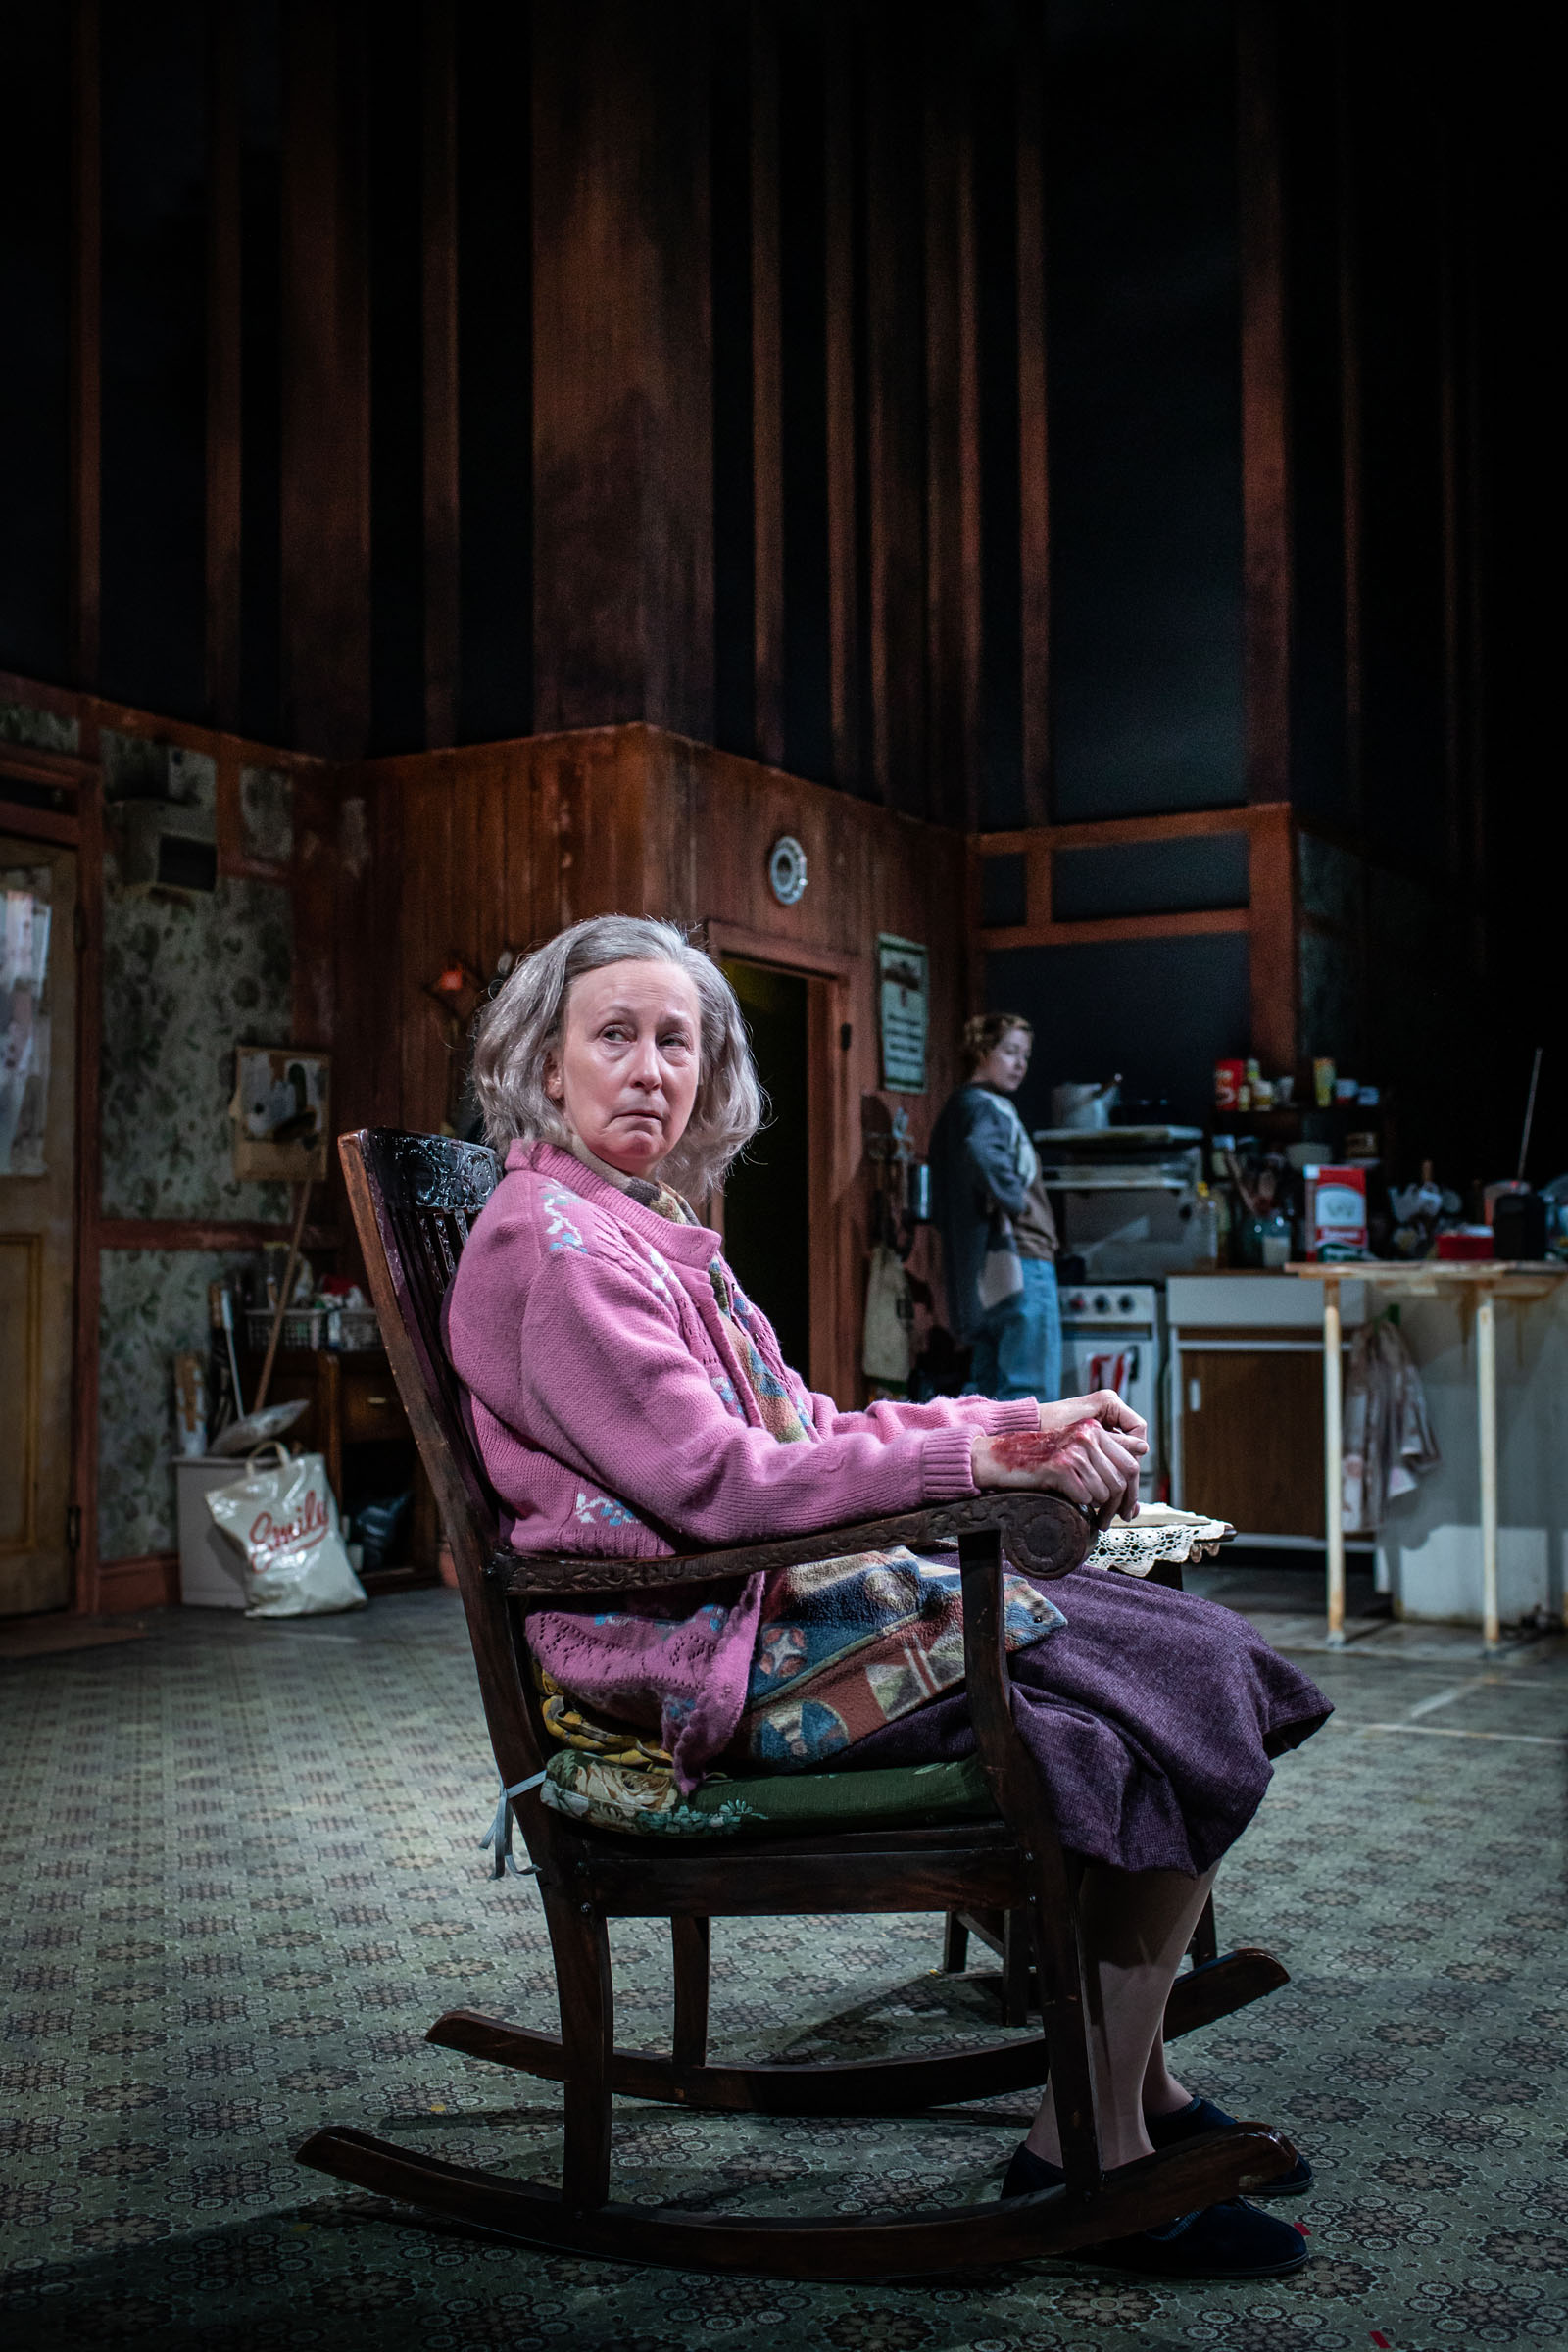 McDonagh ; Ingrid Craigie as Mag and Orla Fitzgerald as Maureen Folan, in The Beauty Queen of Leenane